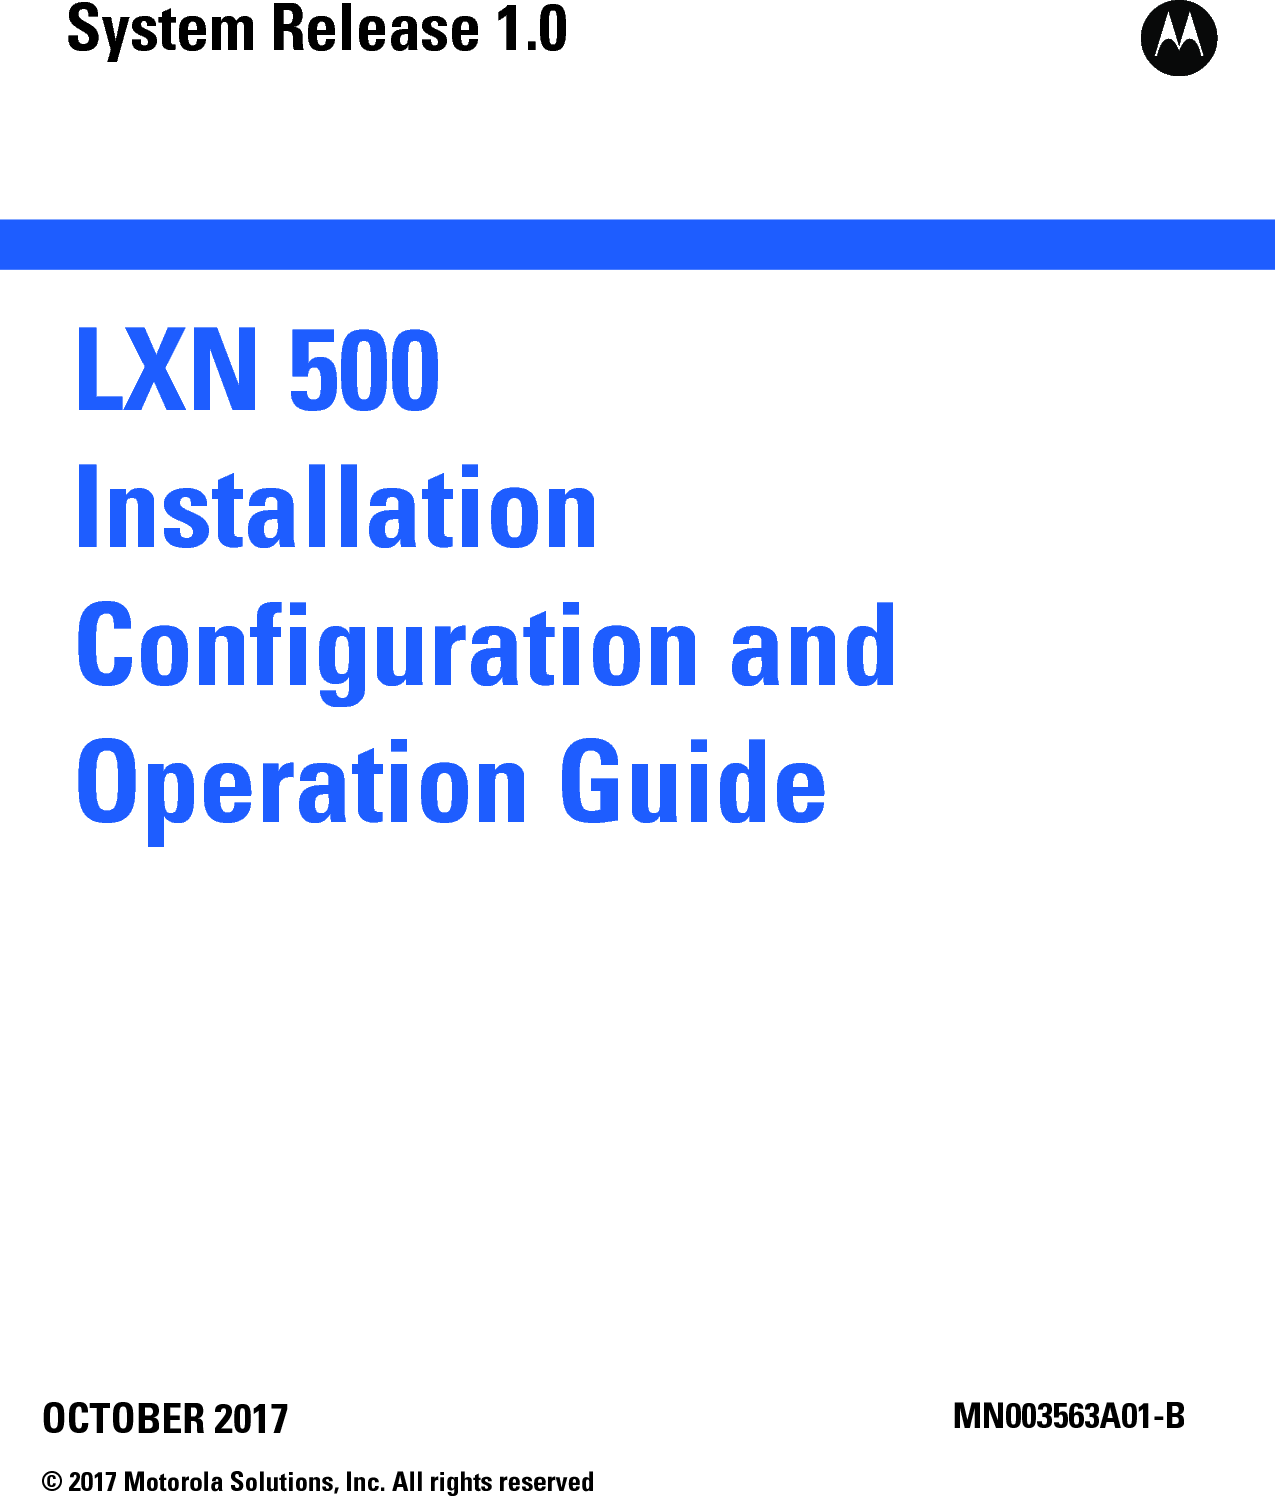 aaLXN 500Installation Configuration and Operation GuideOCTOBER 2017© 2017 Motorola Solutions, Inc. All rights reservedMN003563A01-BSystem Release 1.0